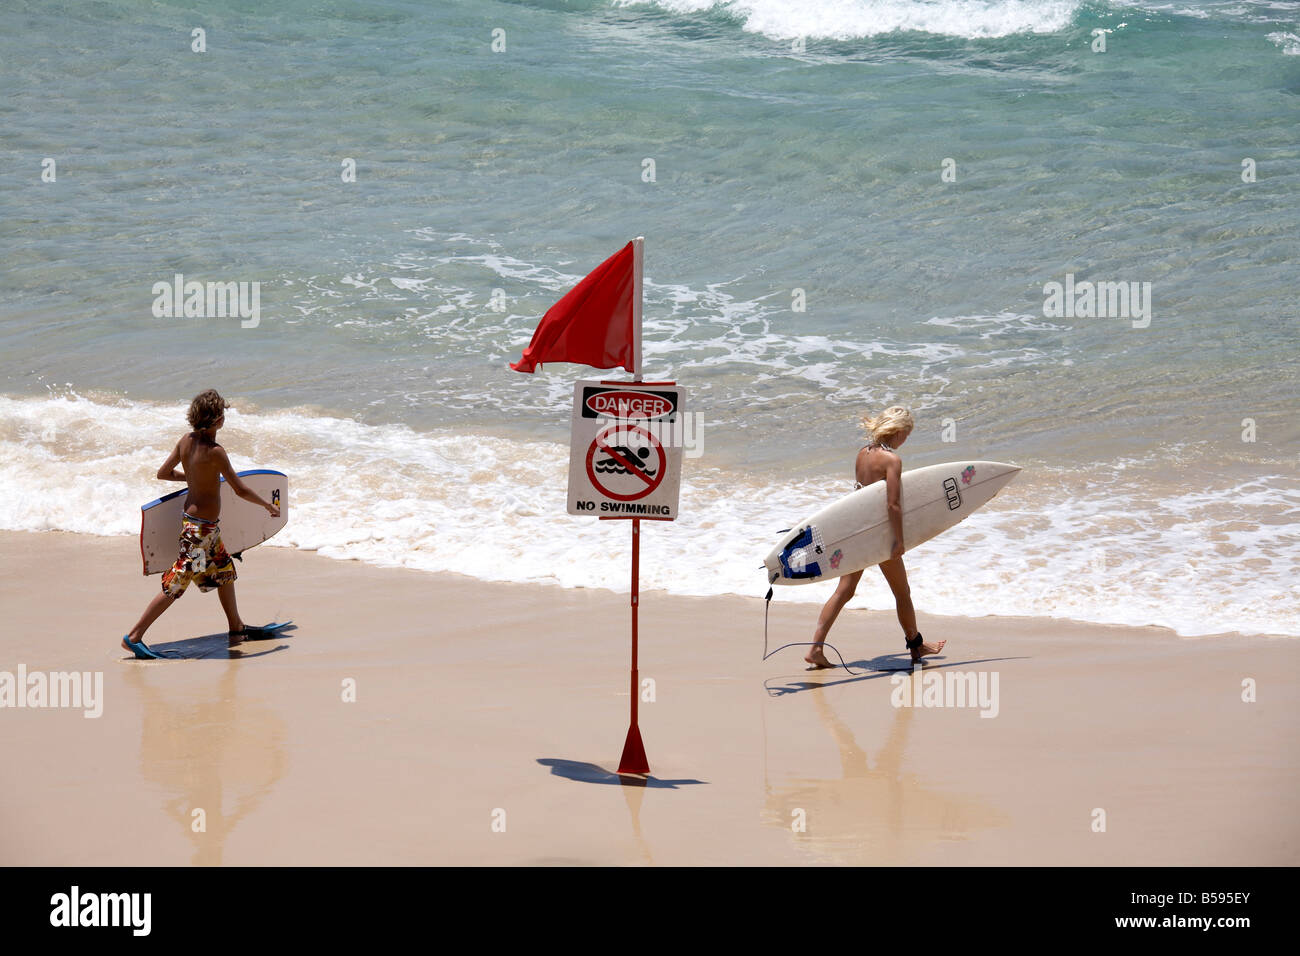 People carrying surf boards past Danger No Swimming sign with red flag on North Stradbroke Island Queensland QLD Australia Stock Photo